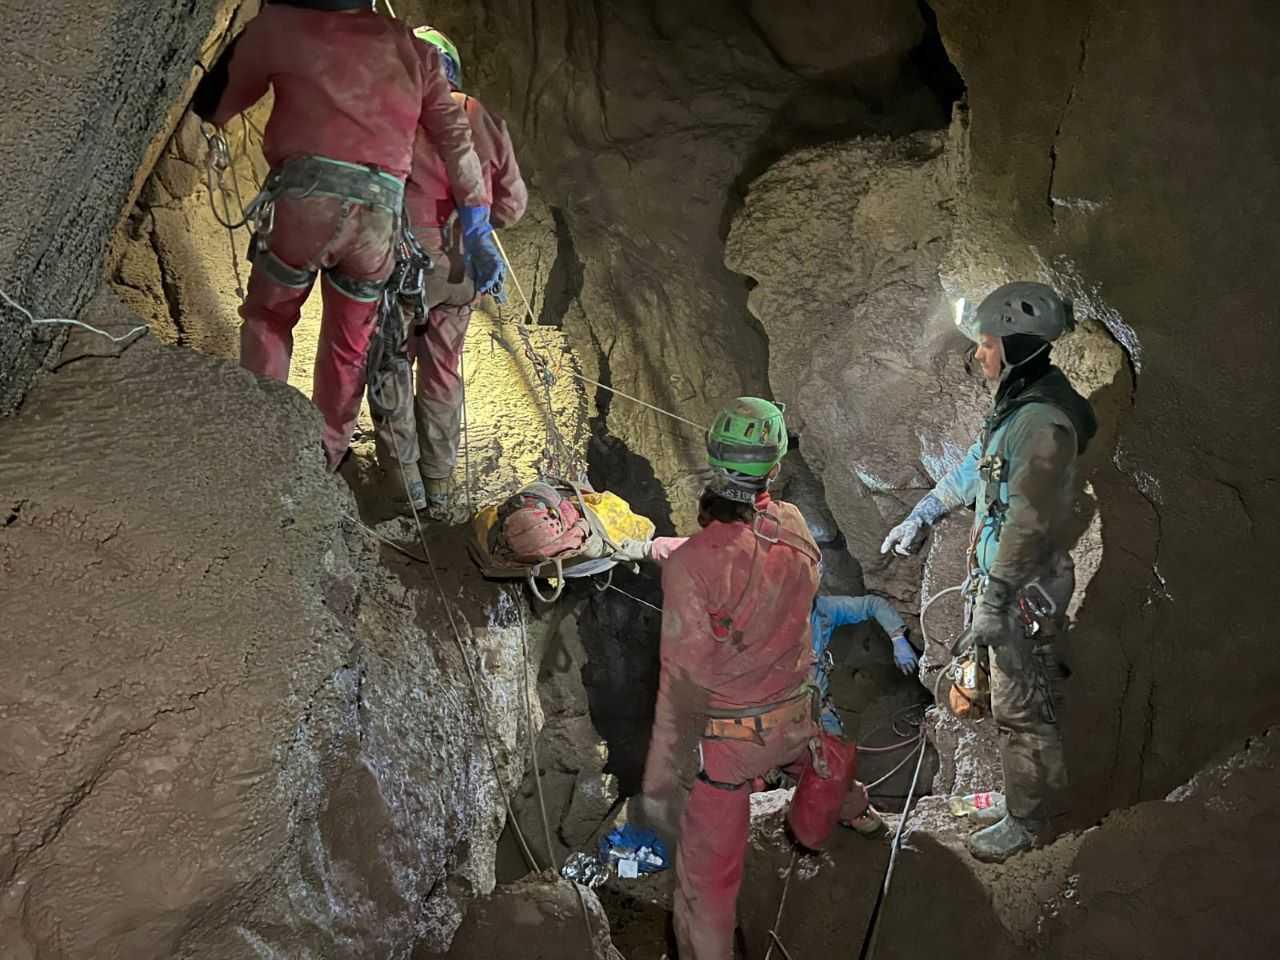 Italian Alpine rescuers (CNSAS) carry US caver Mark Dickey on stretcher as part of a rescue operation in Morca Cave in Mersin province, southern Turkey Sept 11. Photo: Reuters